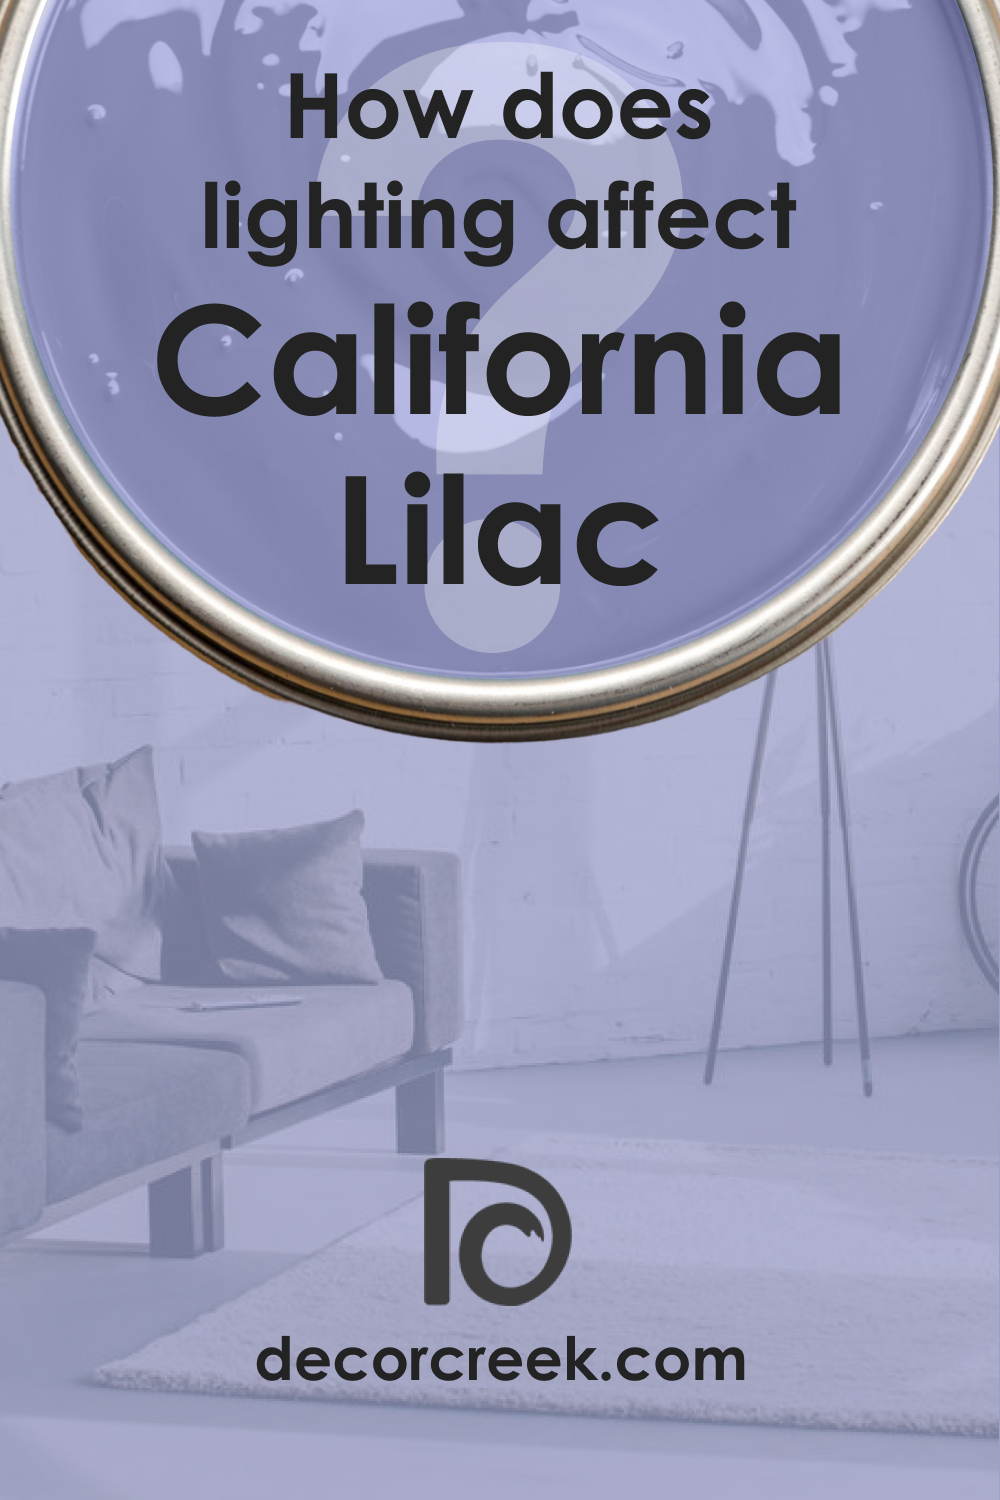 How Does Lighting Affect California Lilac 2068-40?